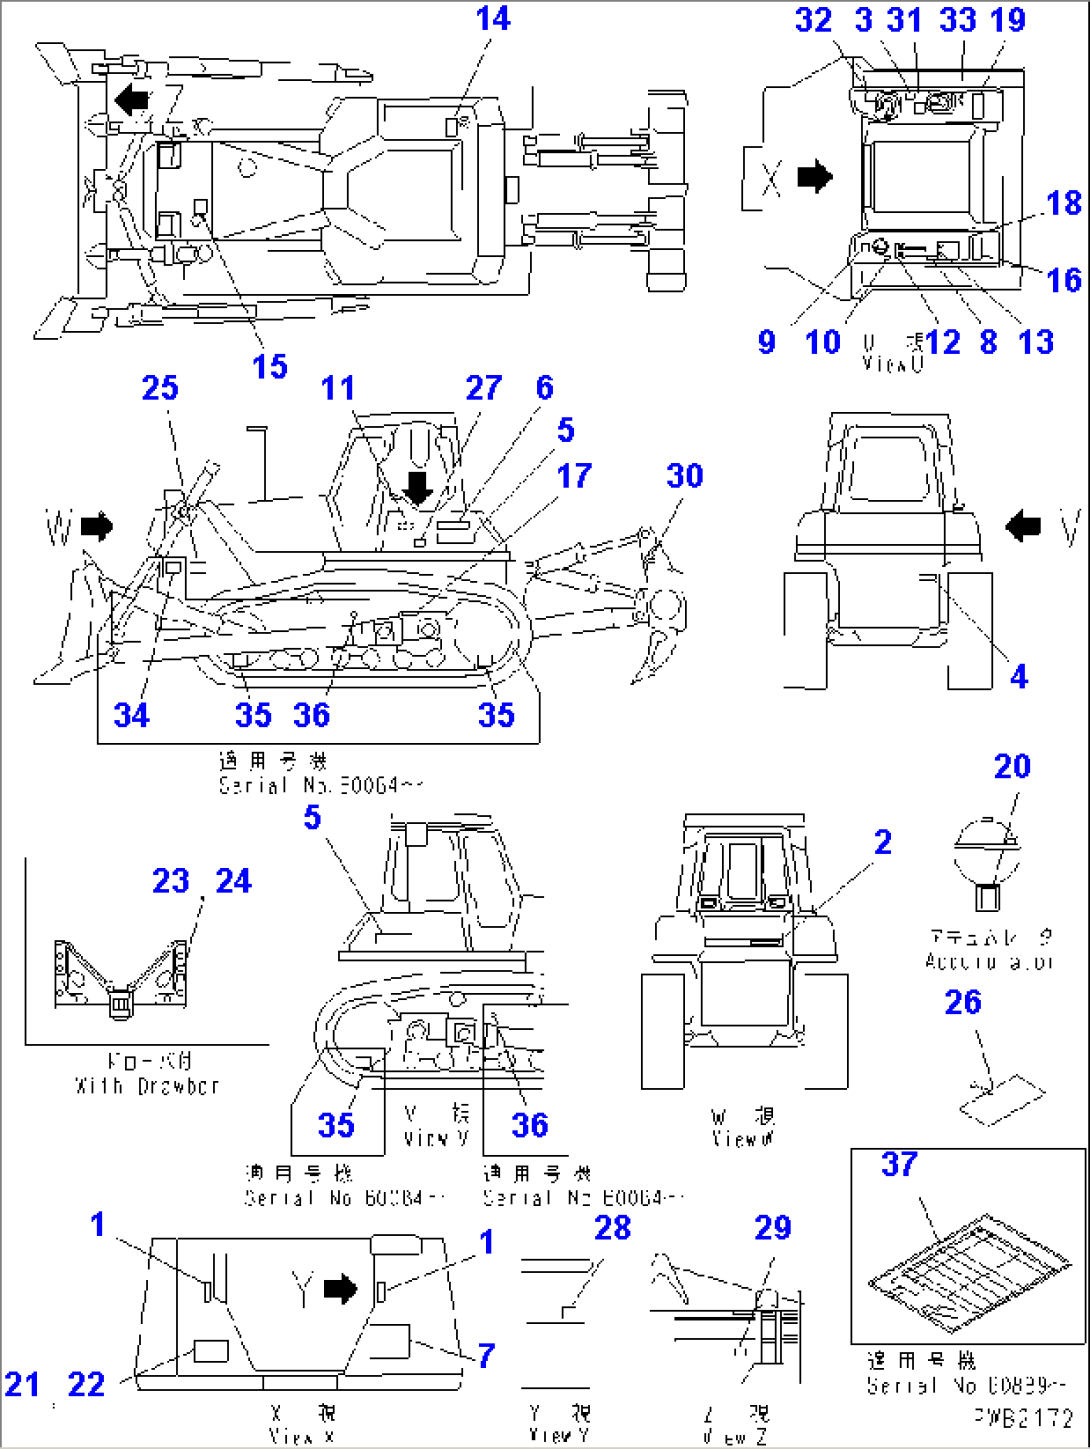 MARKS AND PLATES (FRENCH EC SPEC.)